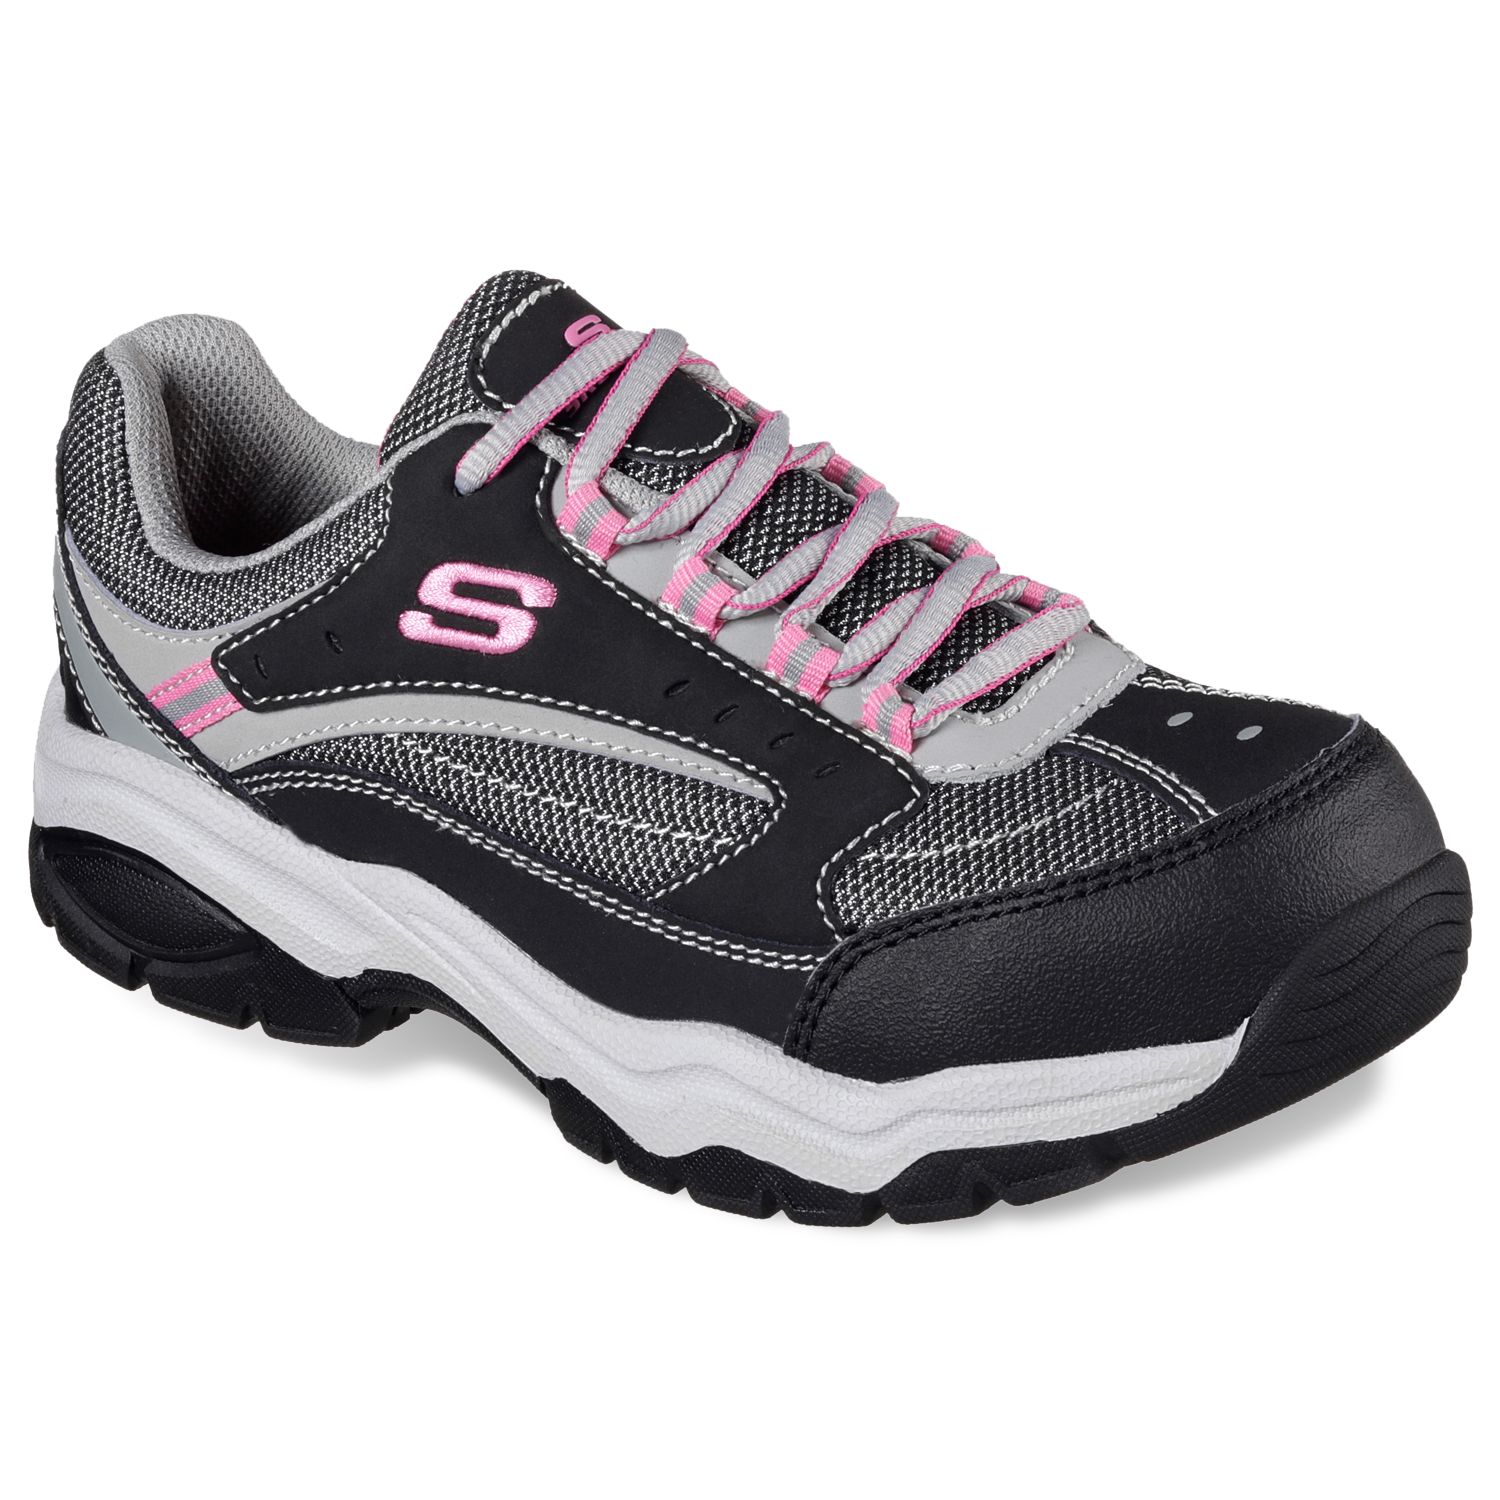 women's safety toe shoes